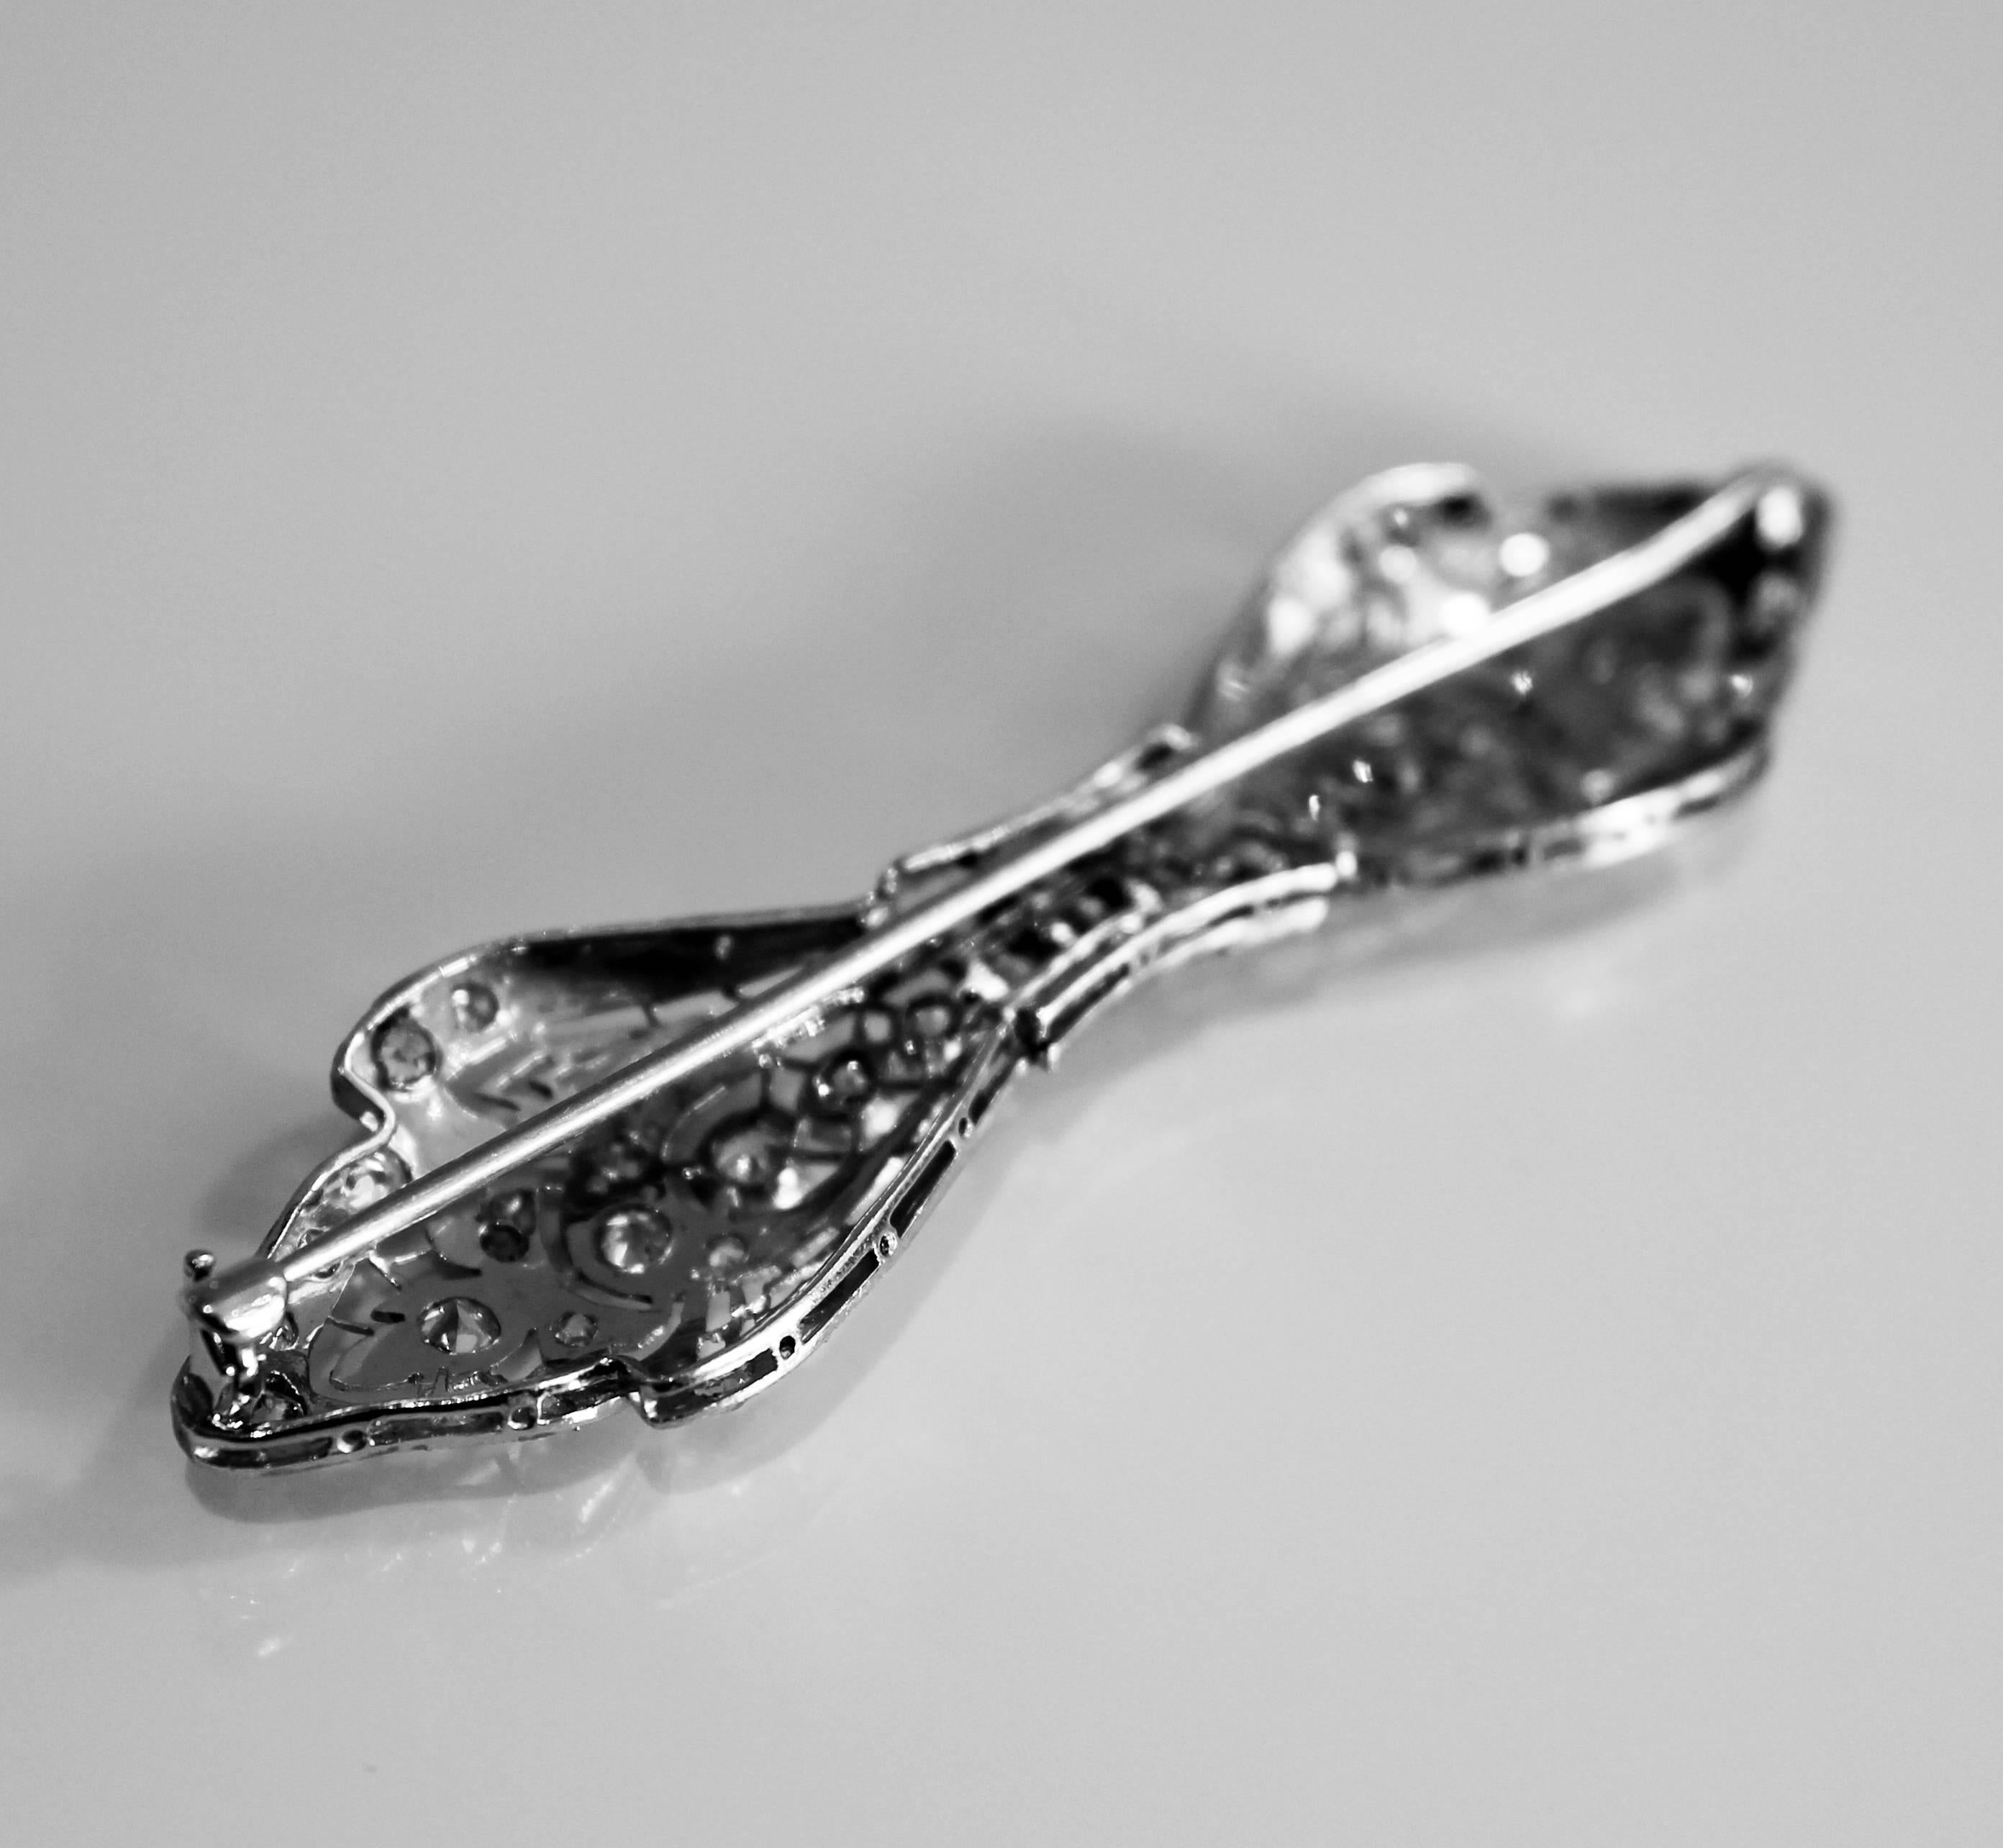 Diamond Art Deco brooch with forty nine old European cut diamonds grain set in platinum in a bow type shape with roller catch and pin fittings. Handmade. Circa 1930.